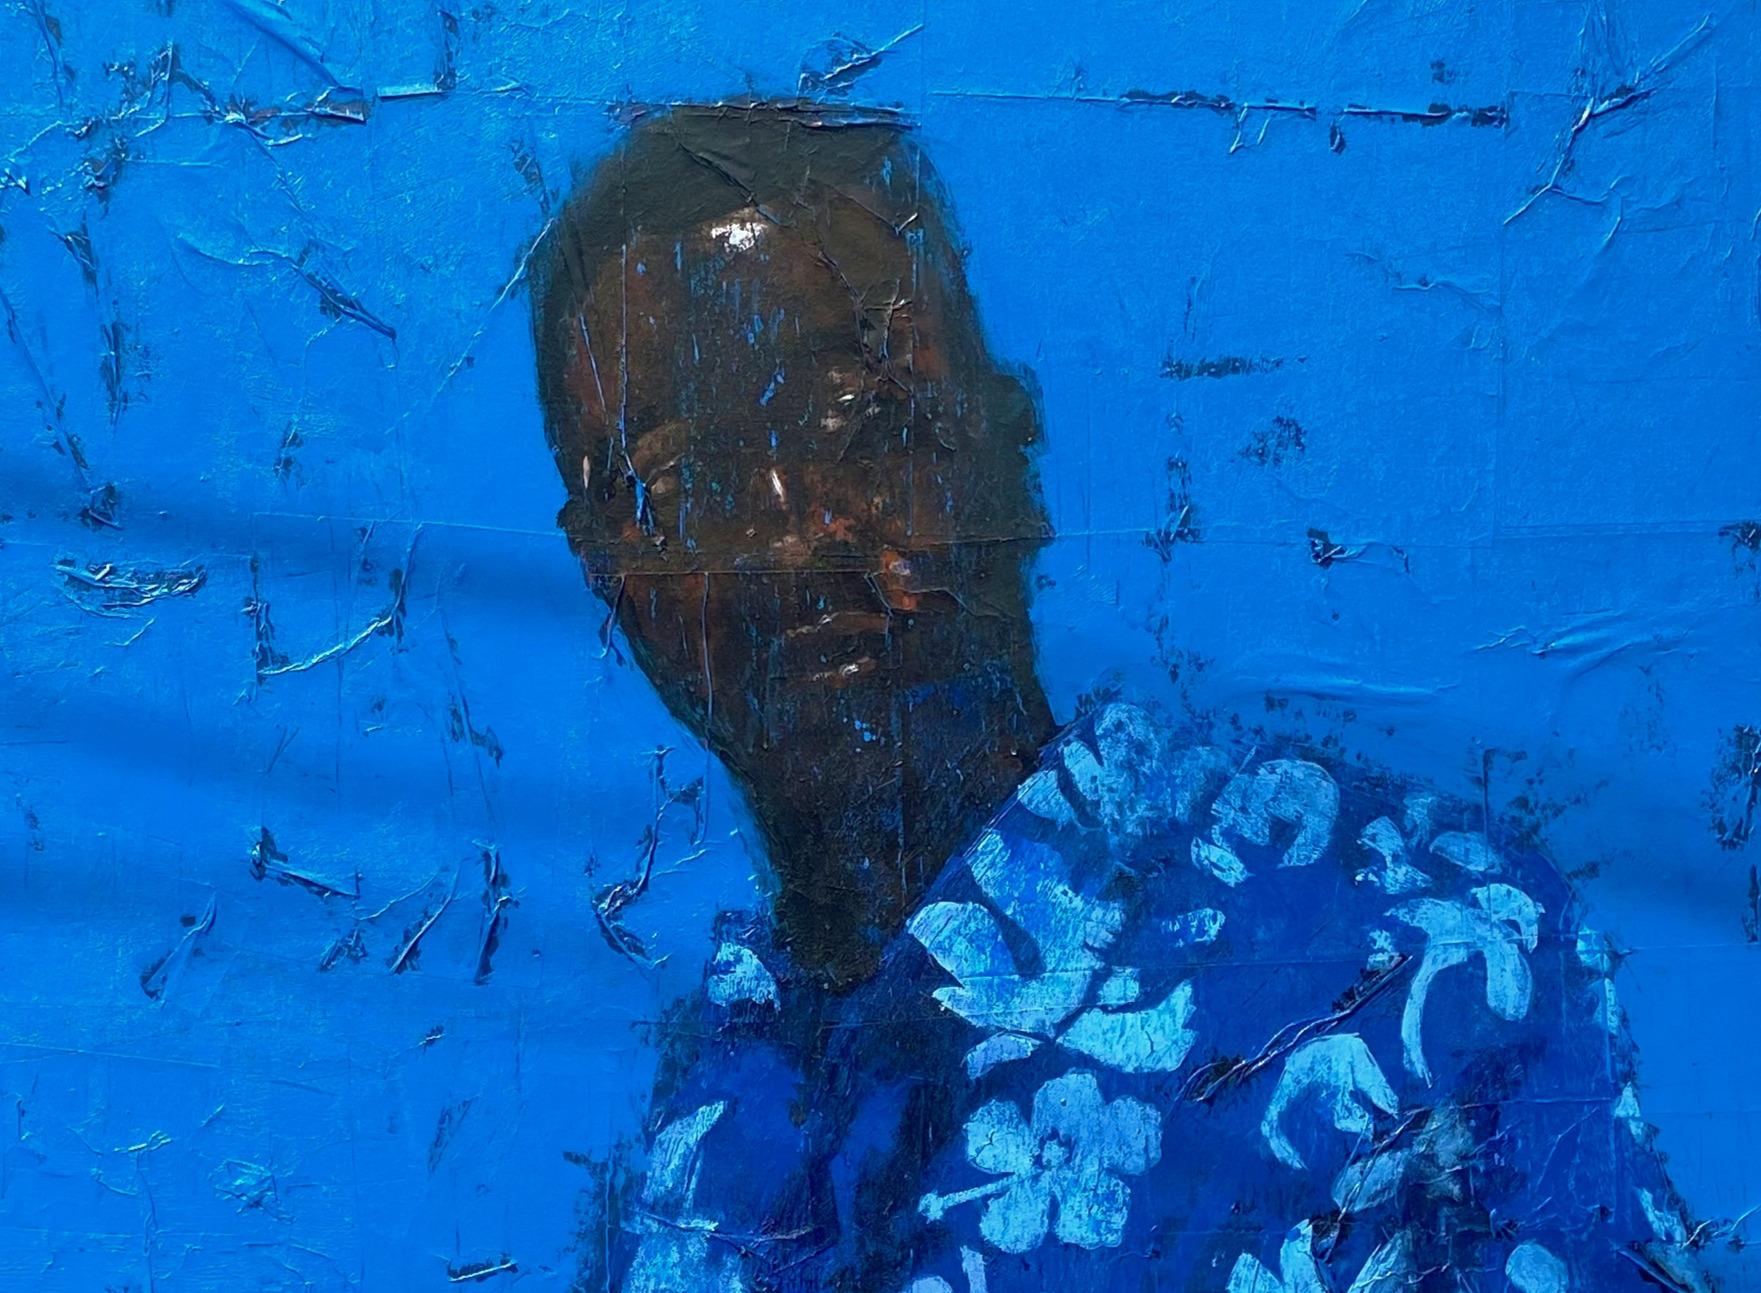 Blue is Cool, Negro Are Cool - Painting by Ashola'sa Daniel